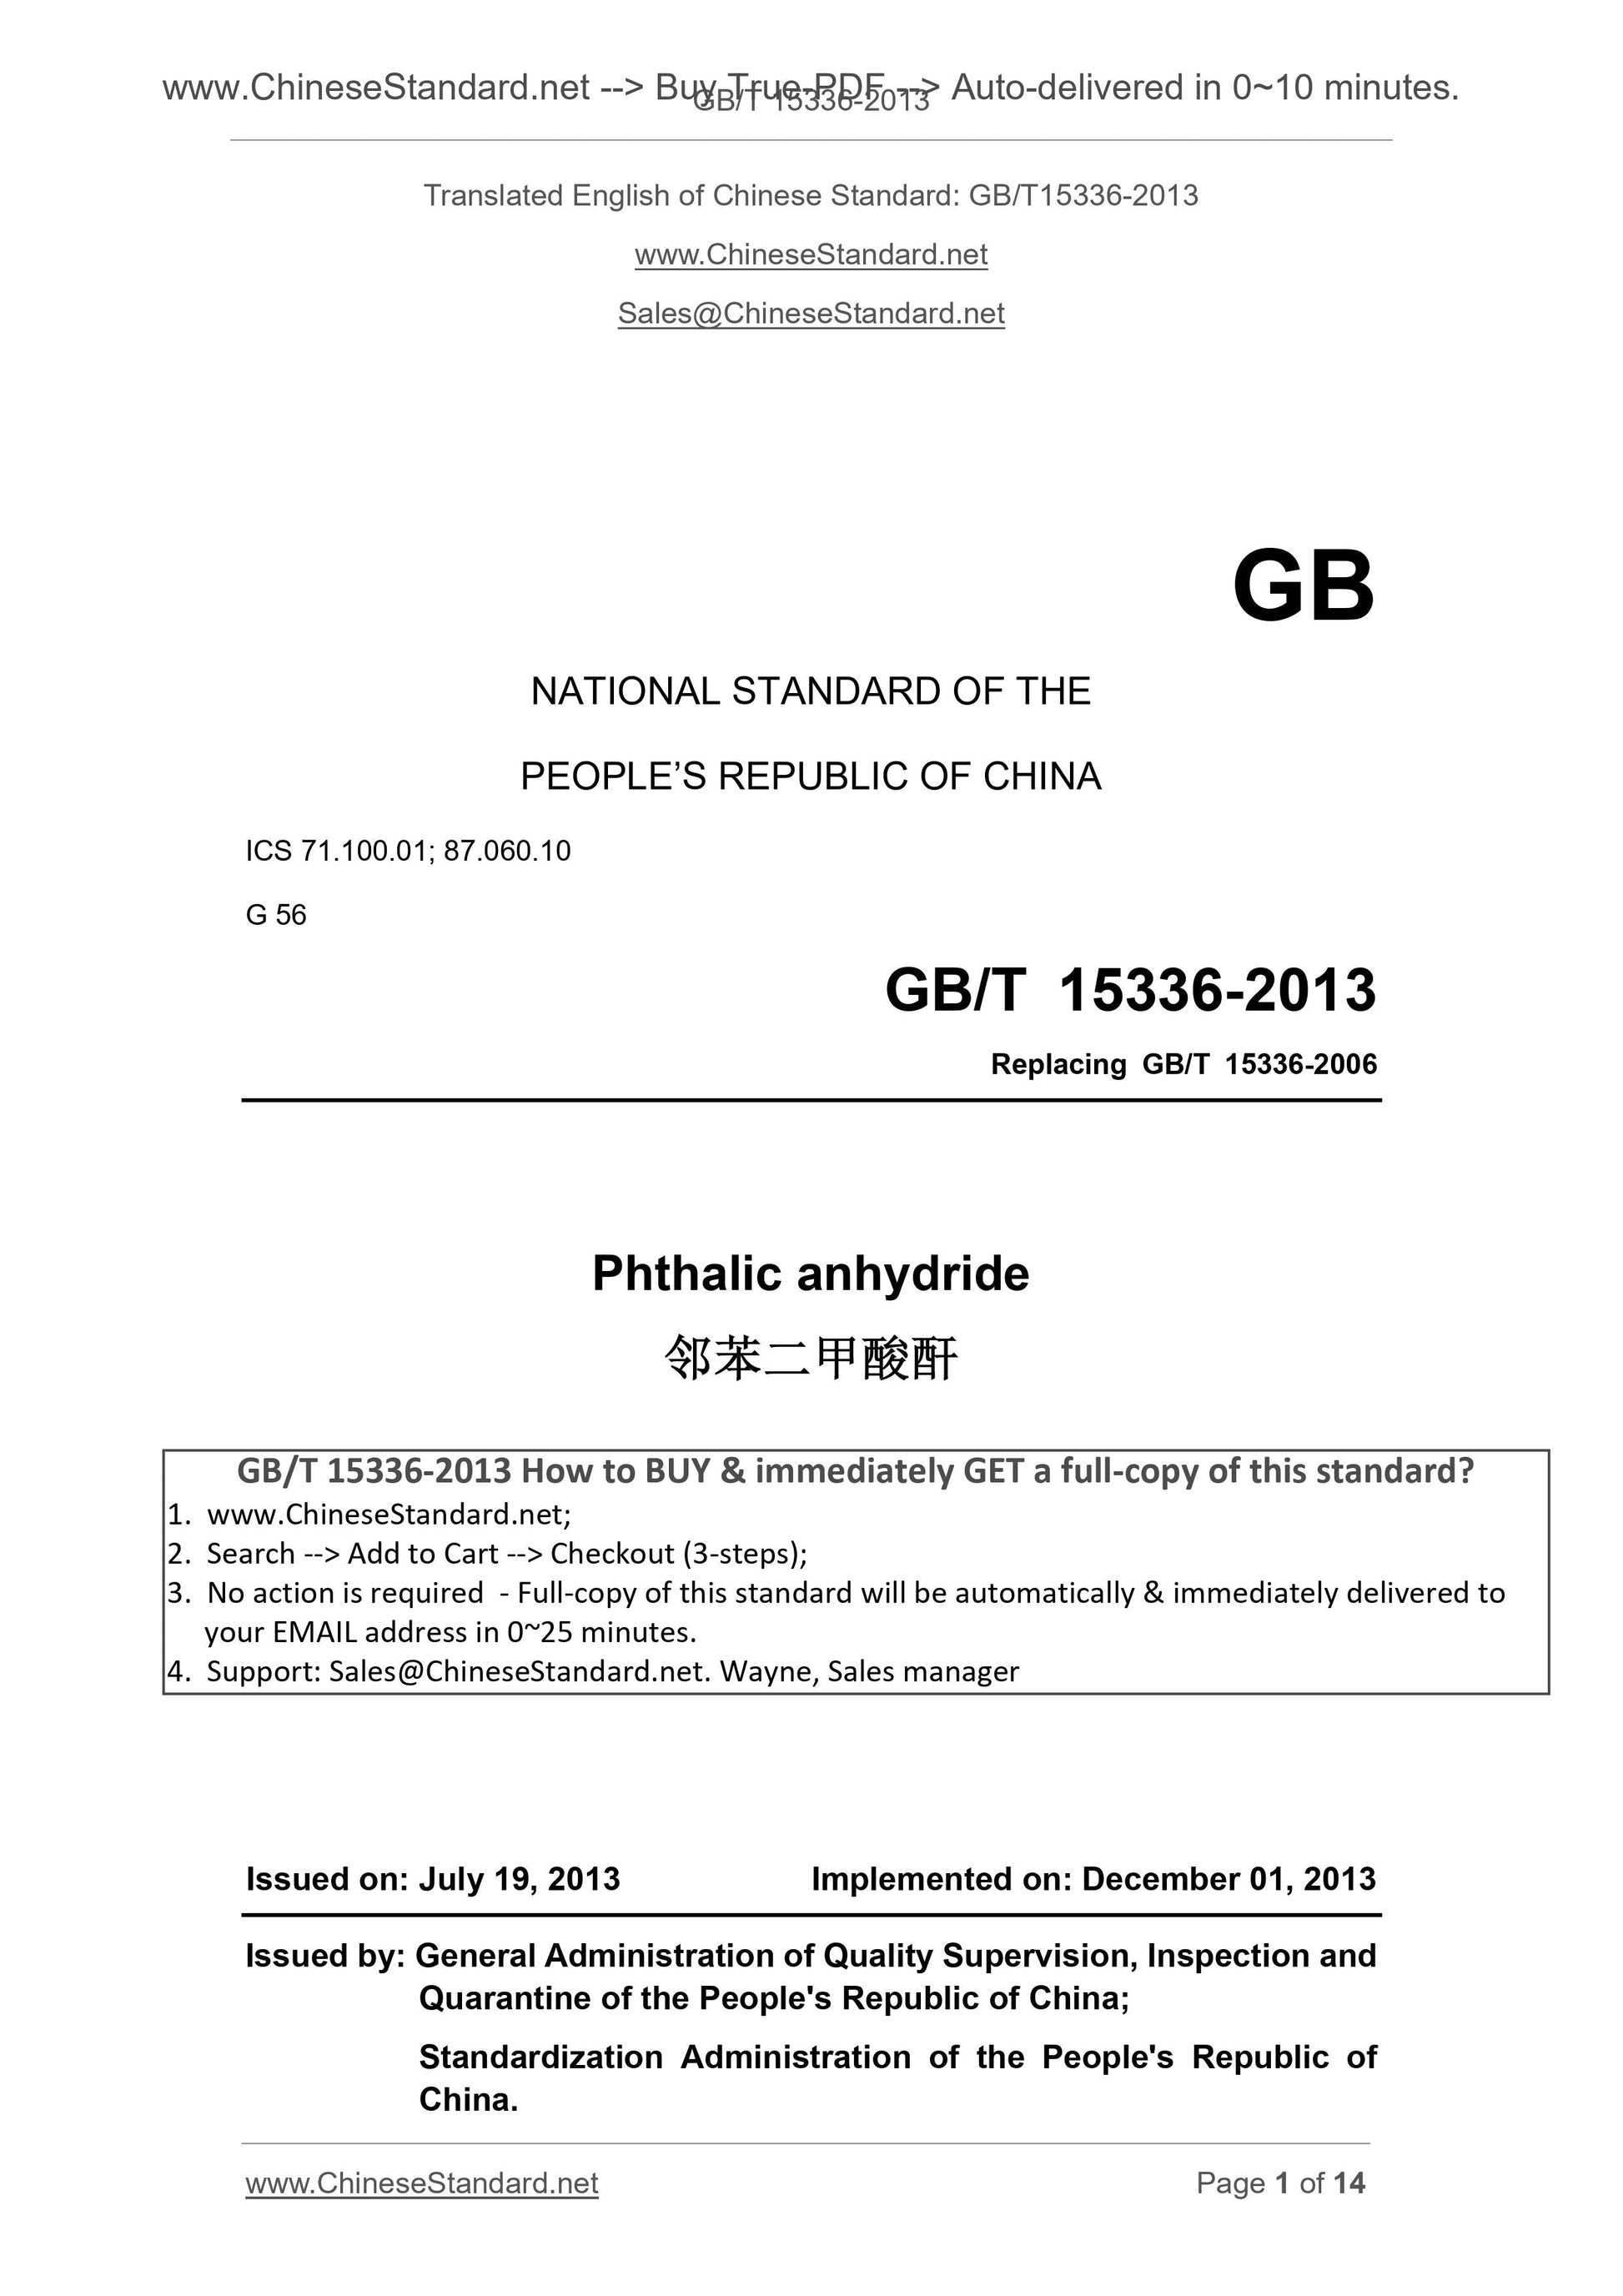 GB/T 15336-2013 Page 1